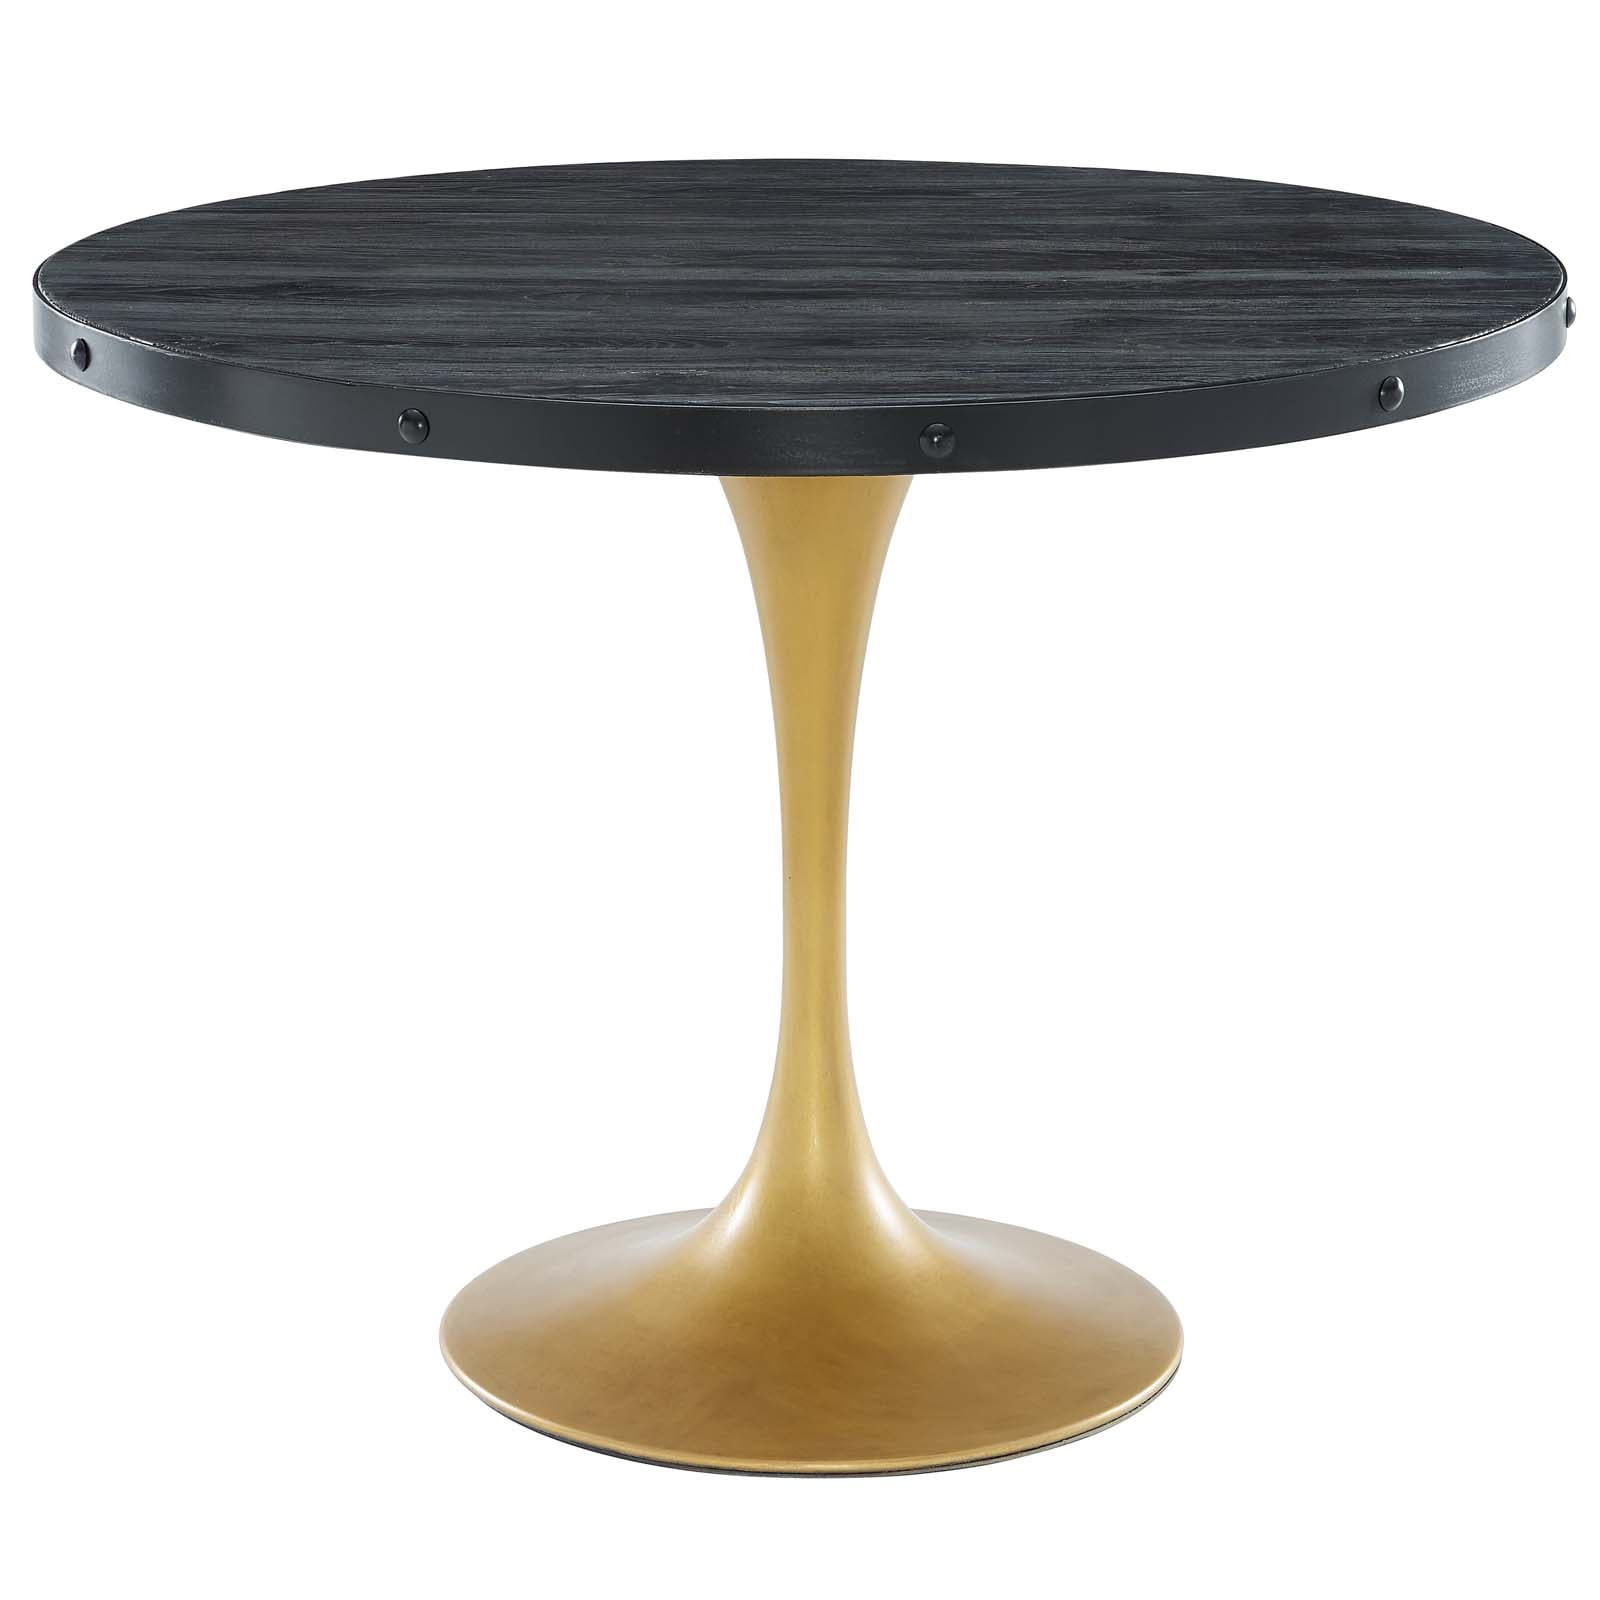 40 Round Wood Top Dining Table Black, 40 Round Dining Table